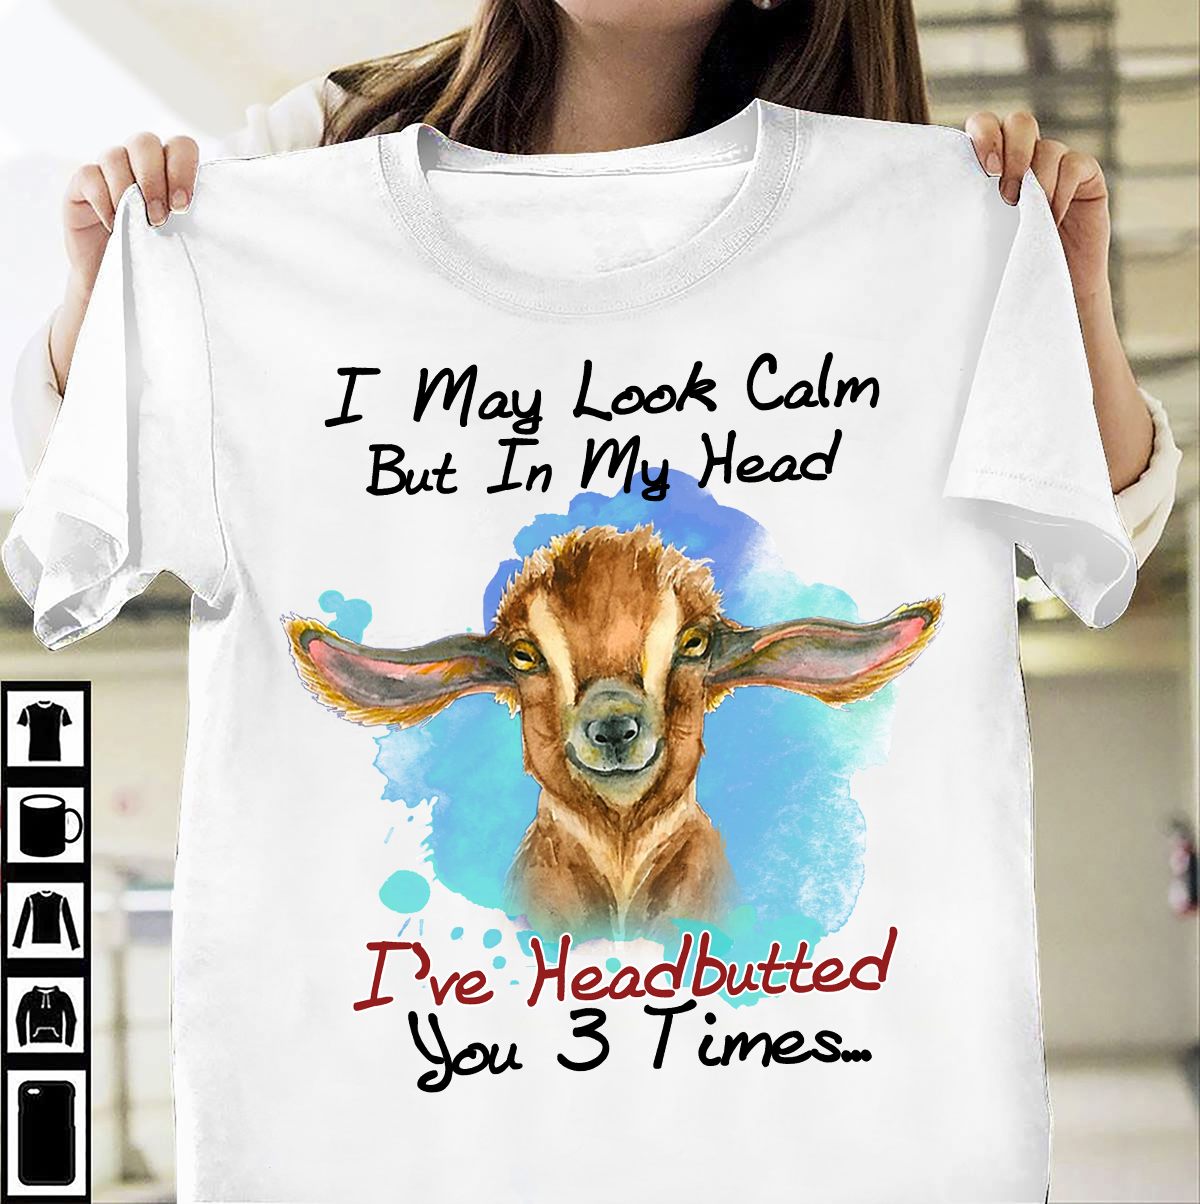 I may look calm but in my head I've headbutted you 3 times - Deer